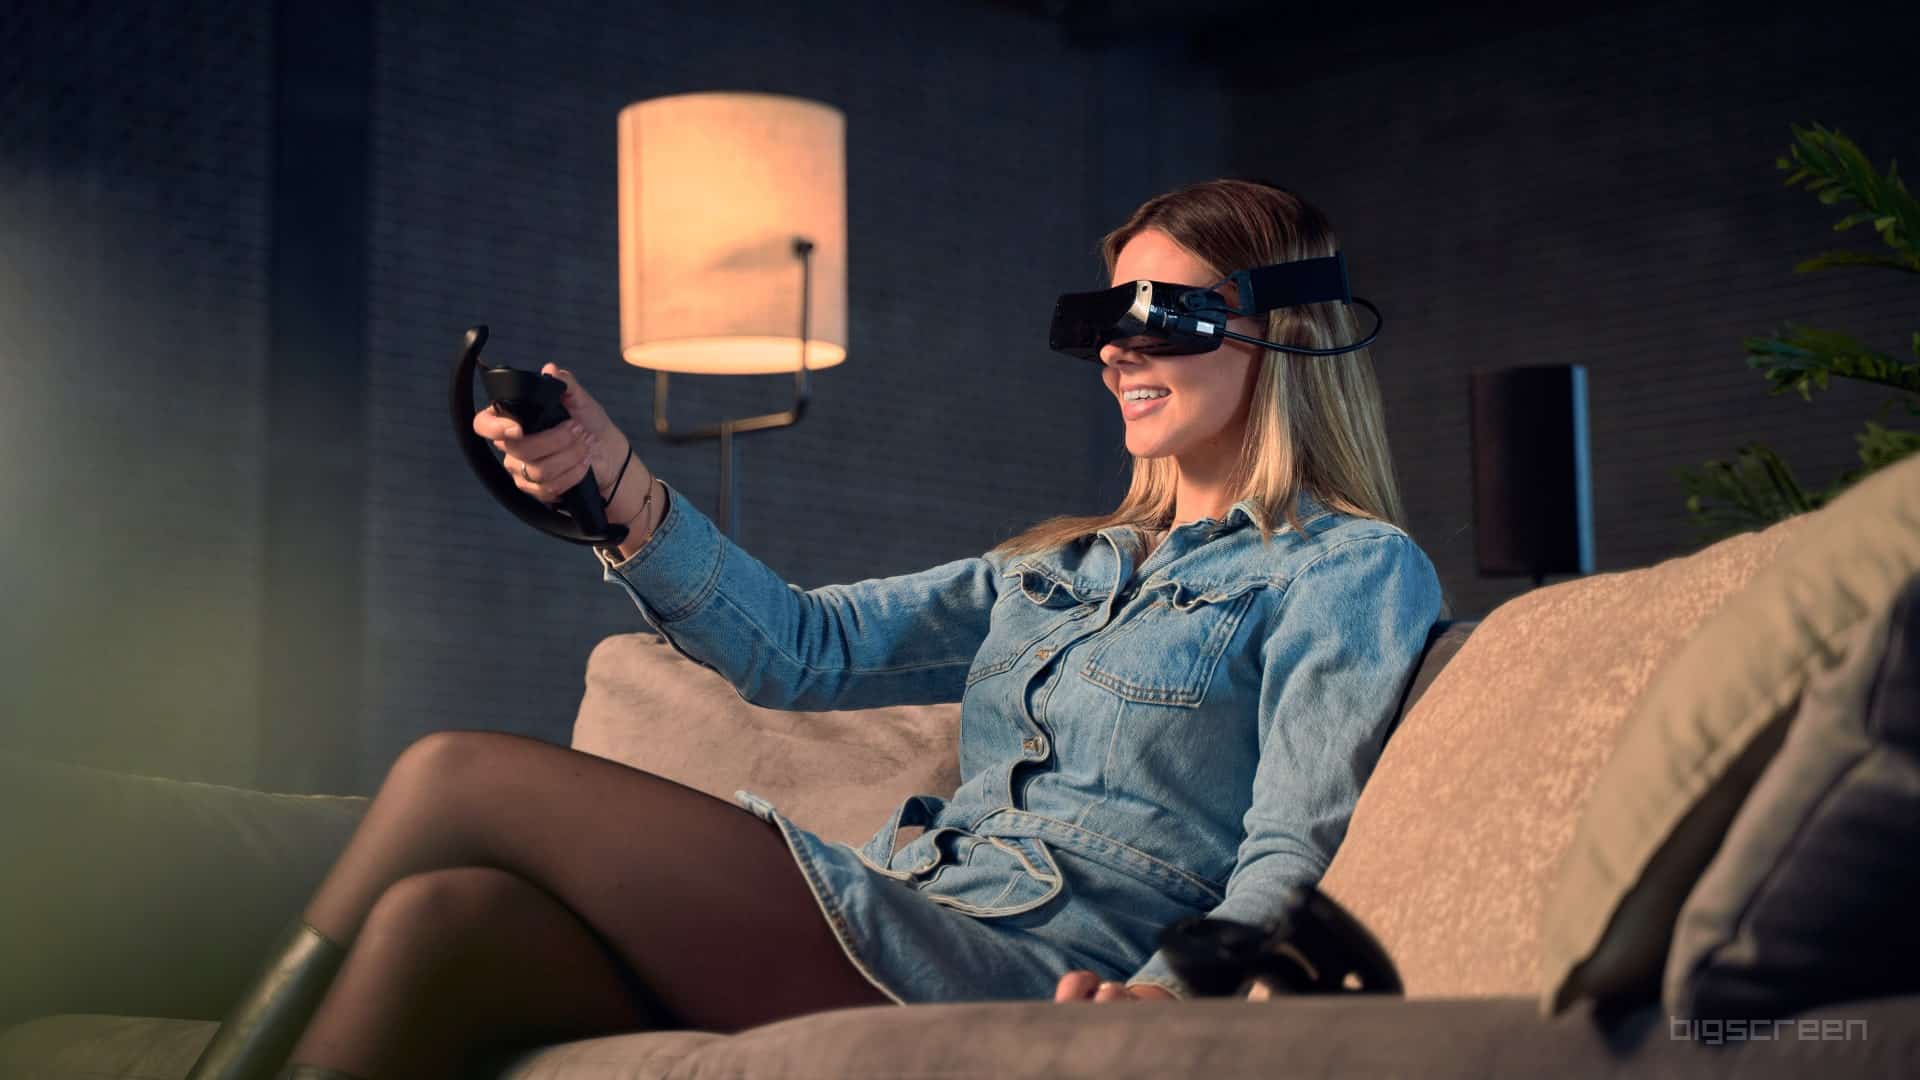 Bigscreen-Beyond-VR-headset-worn-by-a-woman-sitting-on-a-couch